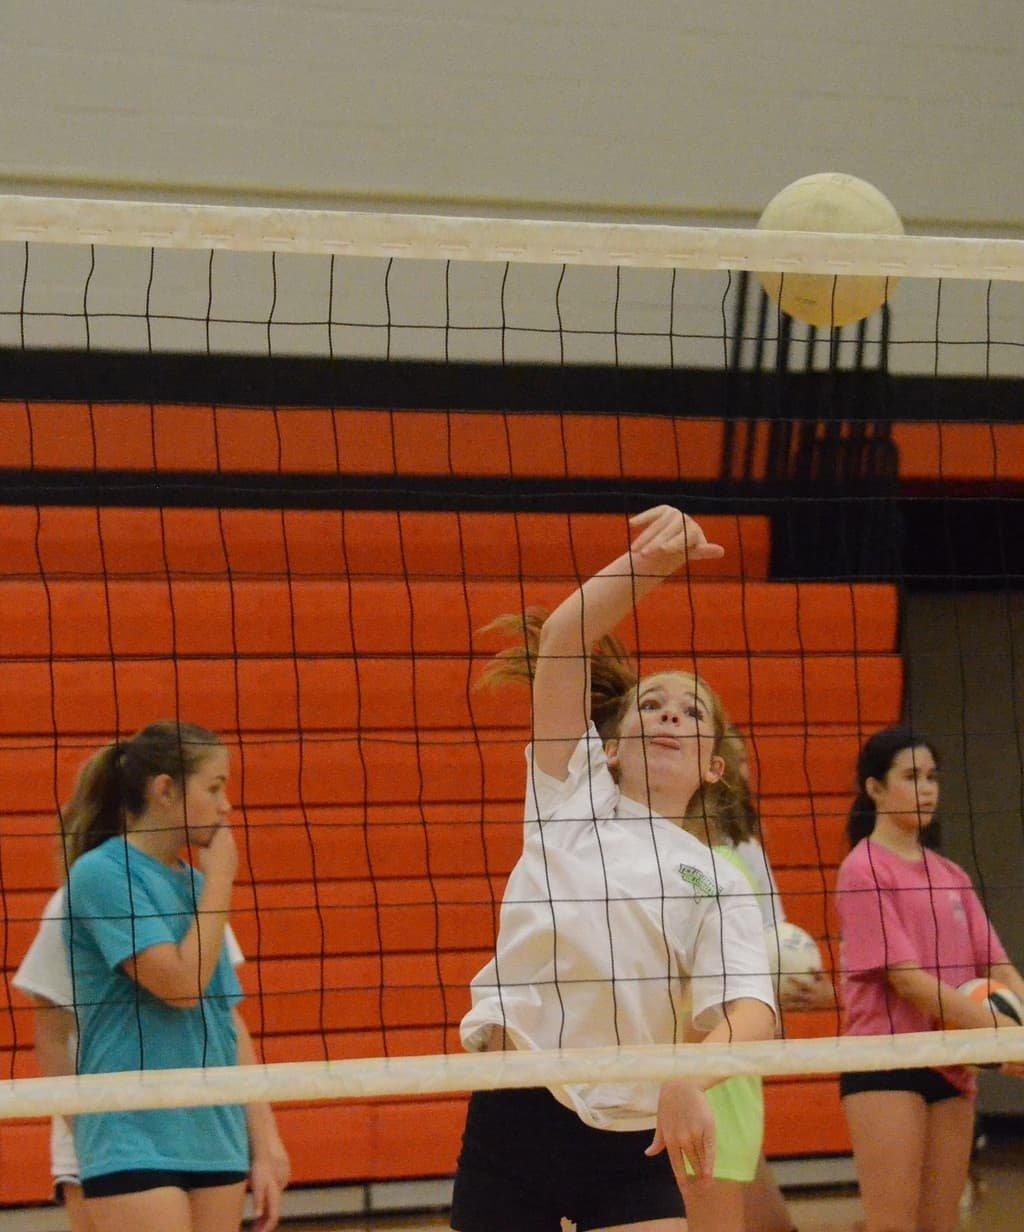 Kennedy McCullough sends down a kill during a hitting drill Tuesday morning at the Ladycats Volleyball Camp at the Daniel Ninth Grade Campus gym. Photo by Tony Eierdam